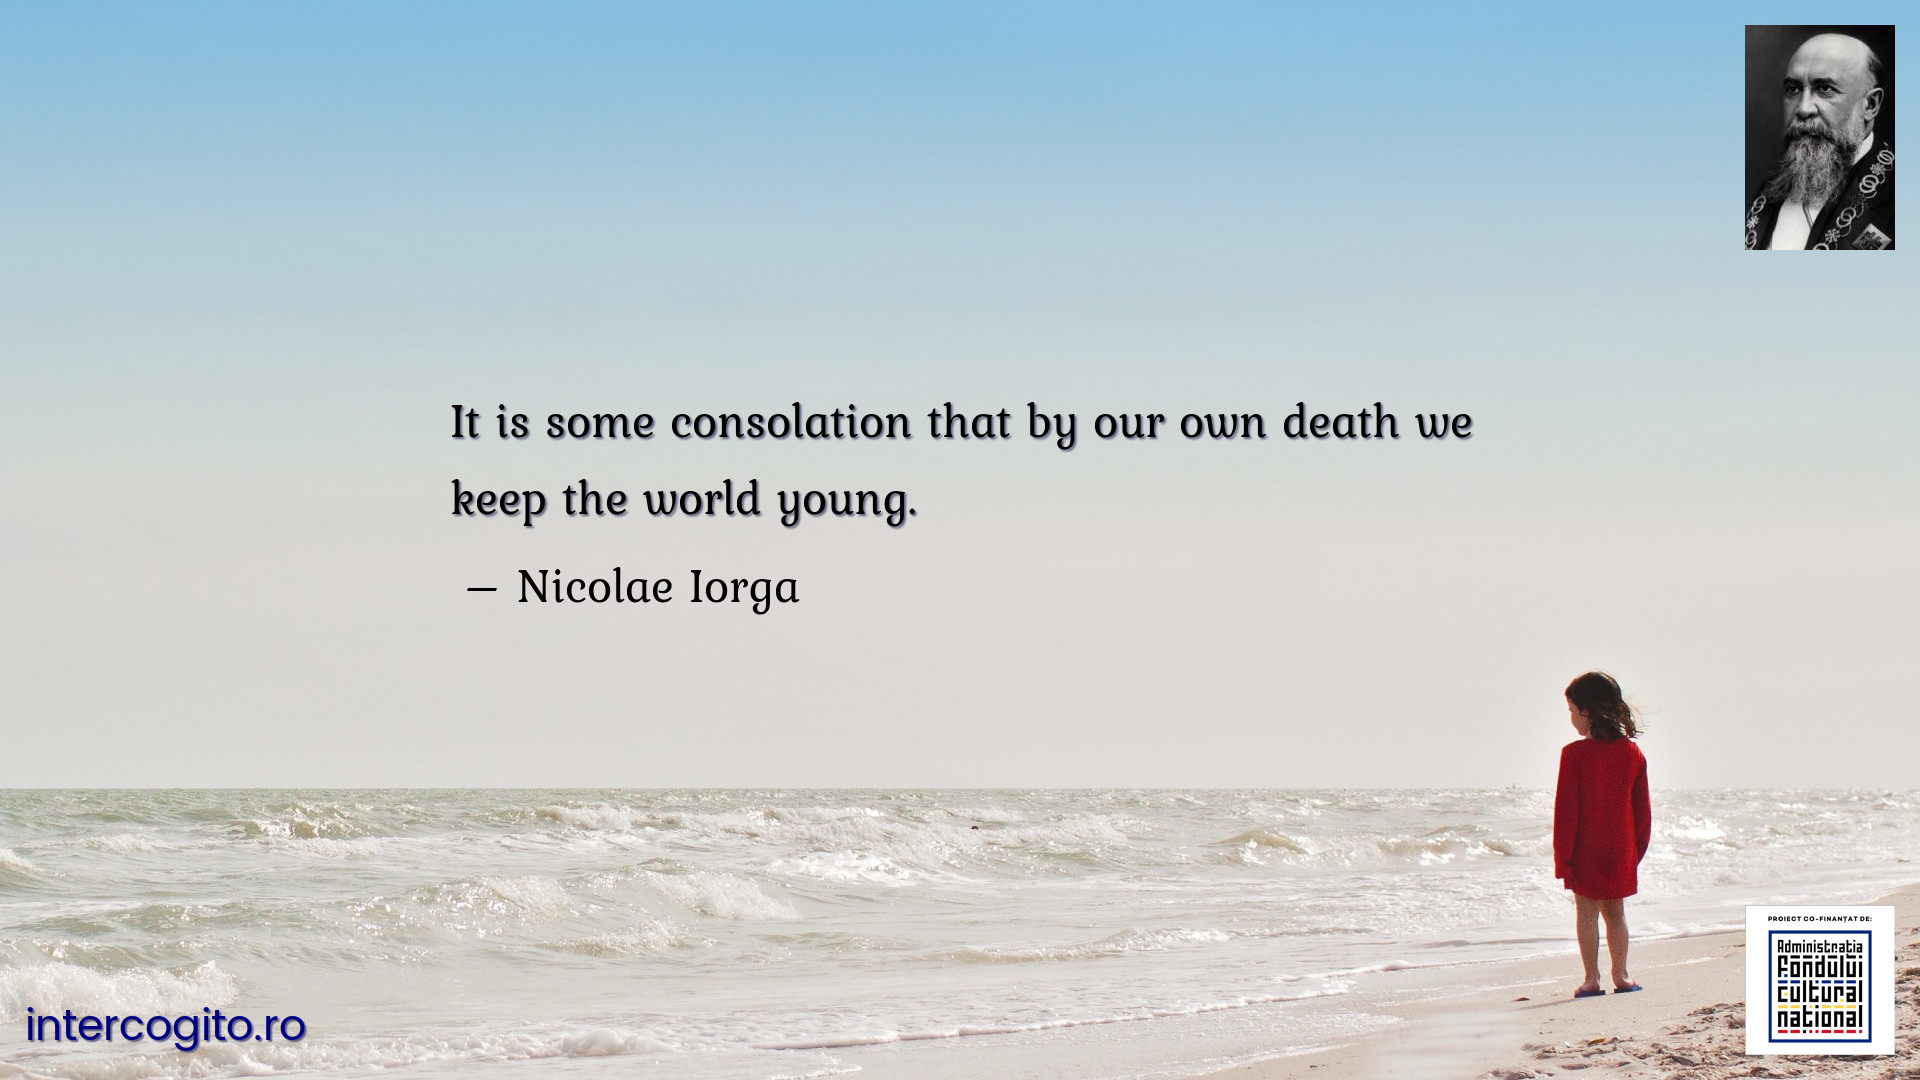 It is some consolation that by our own death we keep the world young.